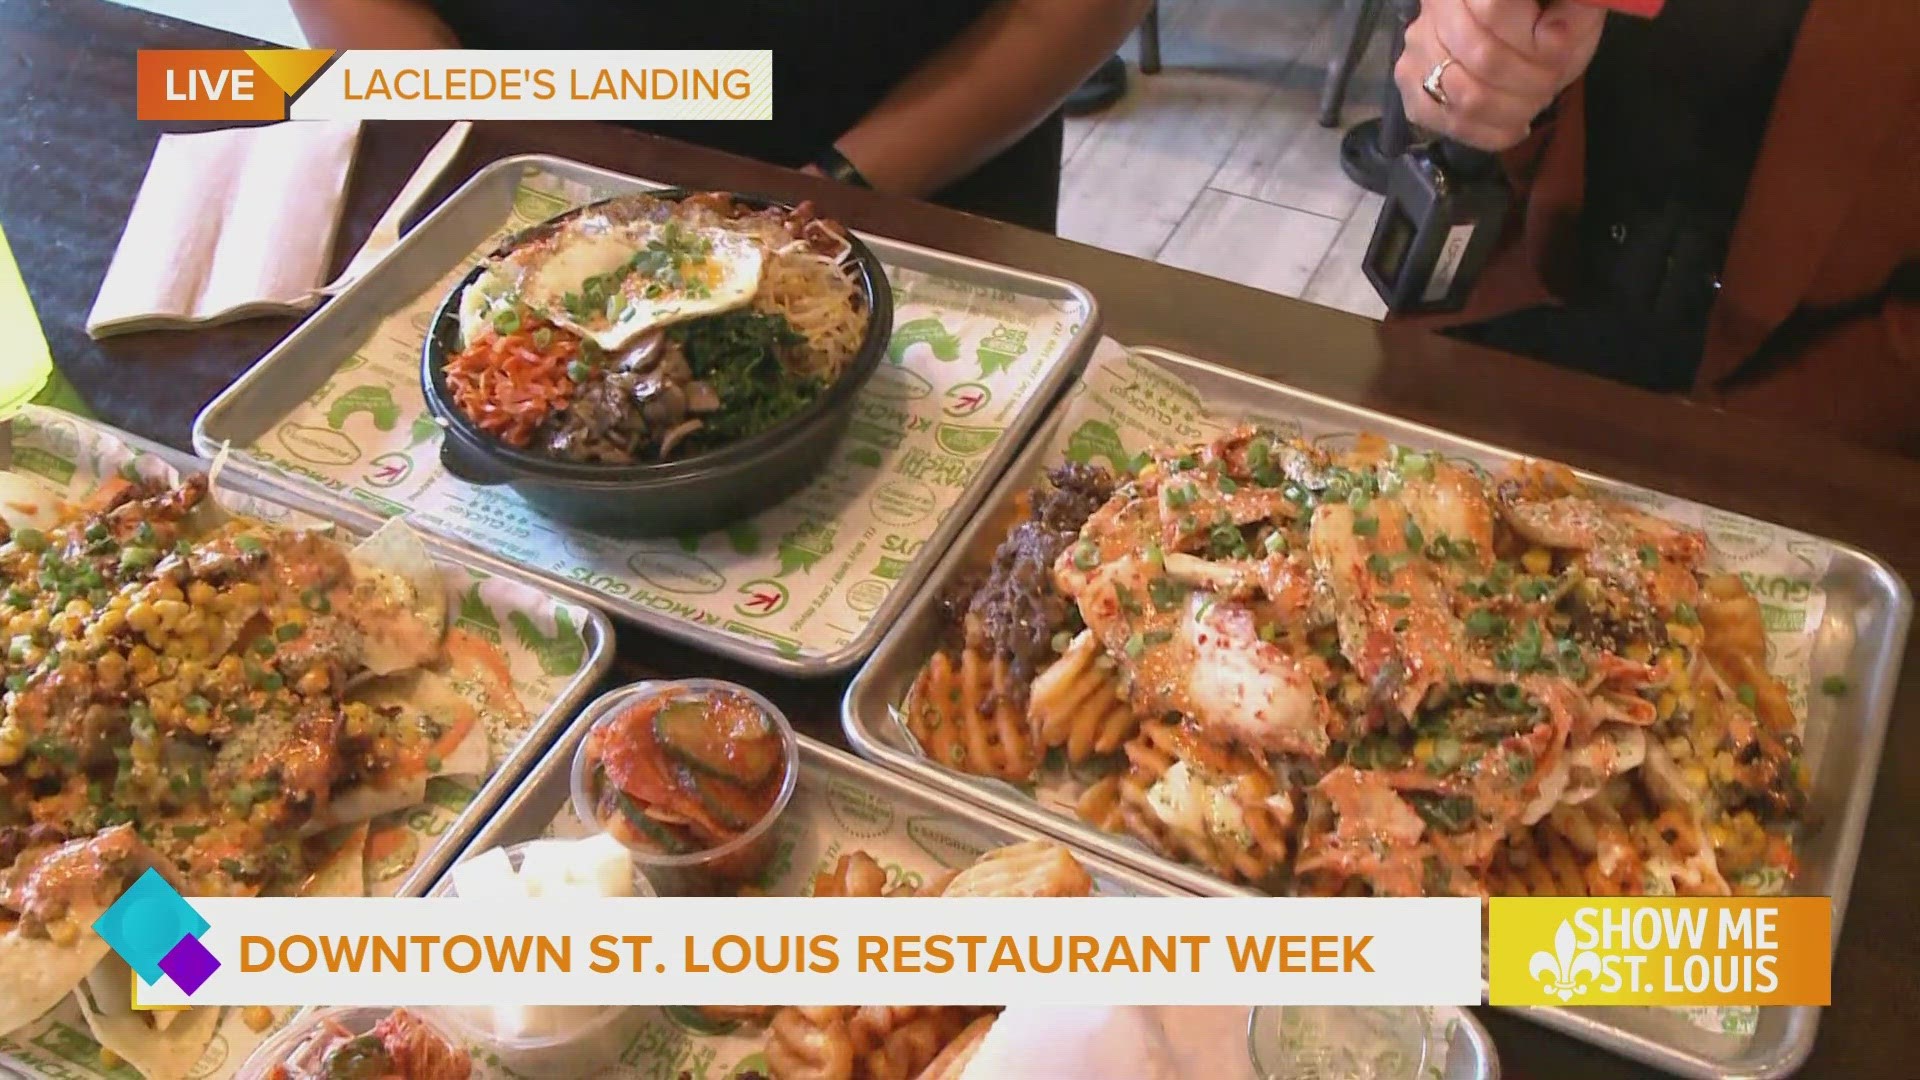 Kimchi Guys is offering $3 off every $10 for Downtown St. Louis Restaurant Week.